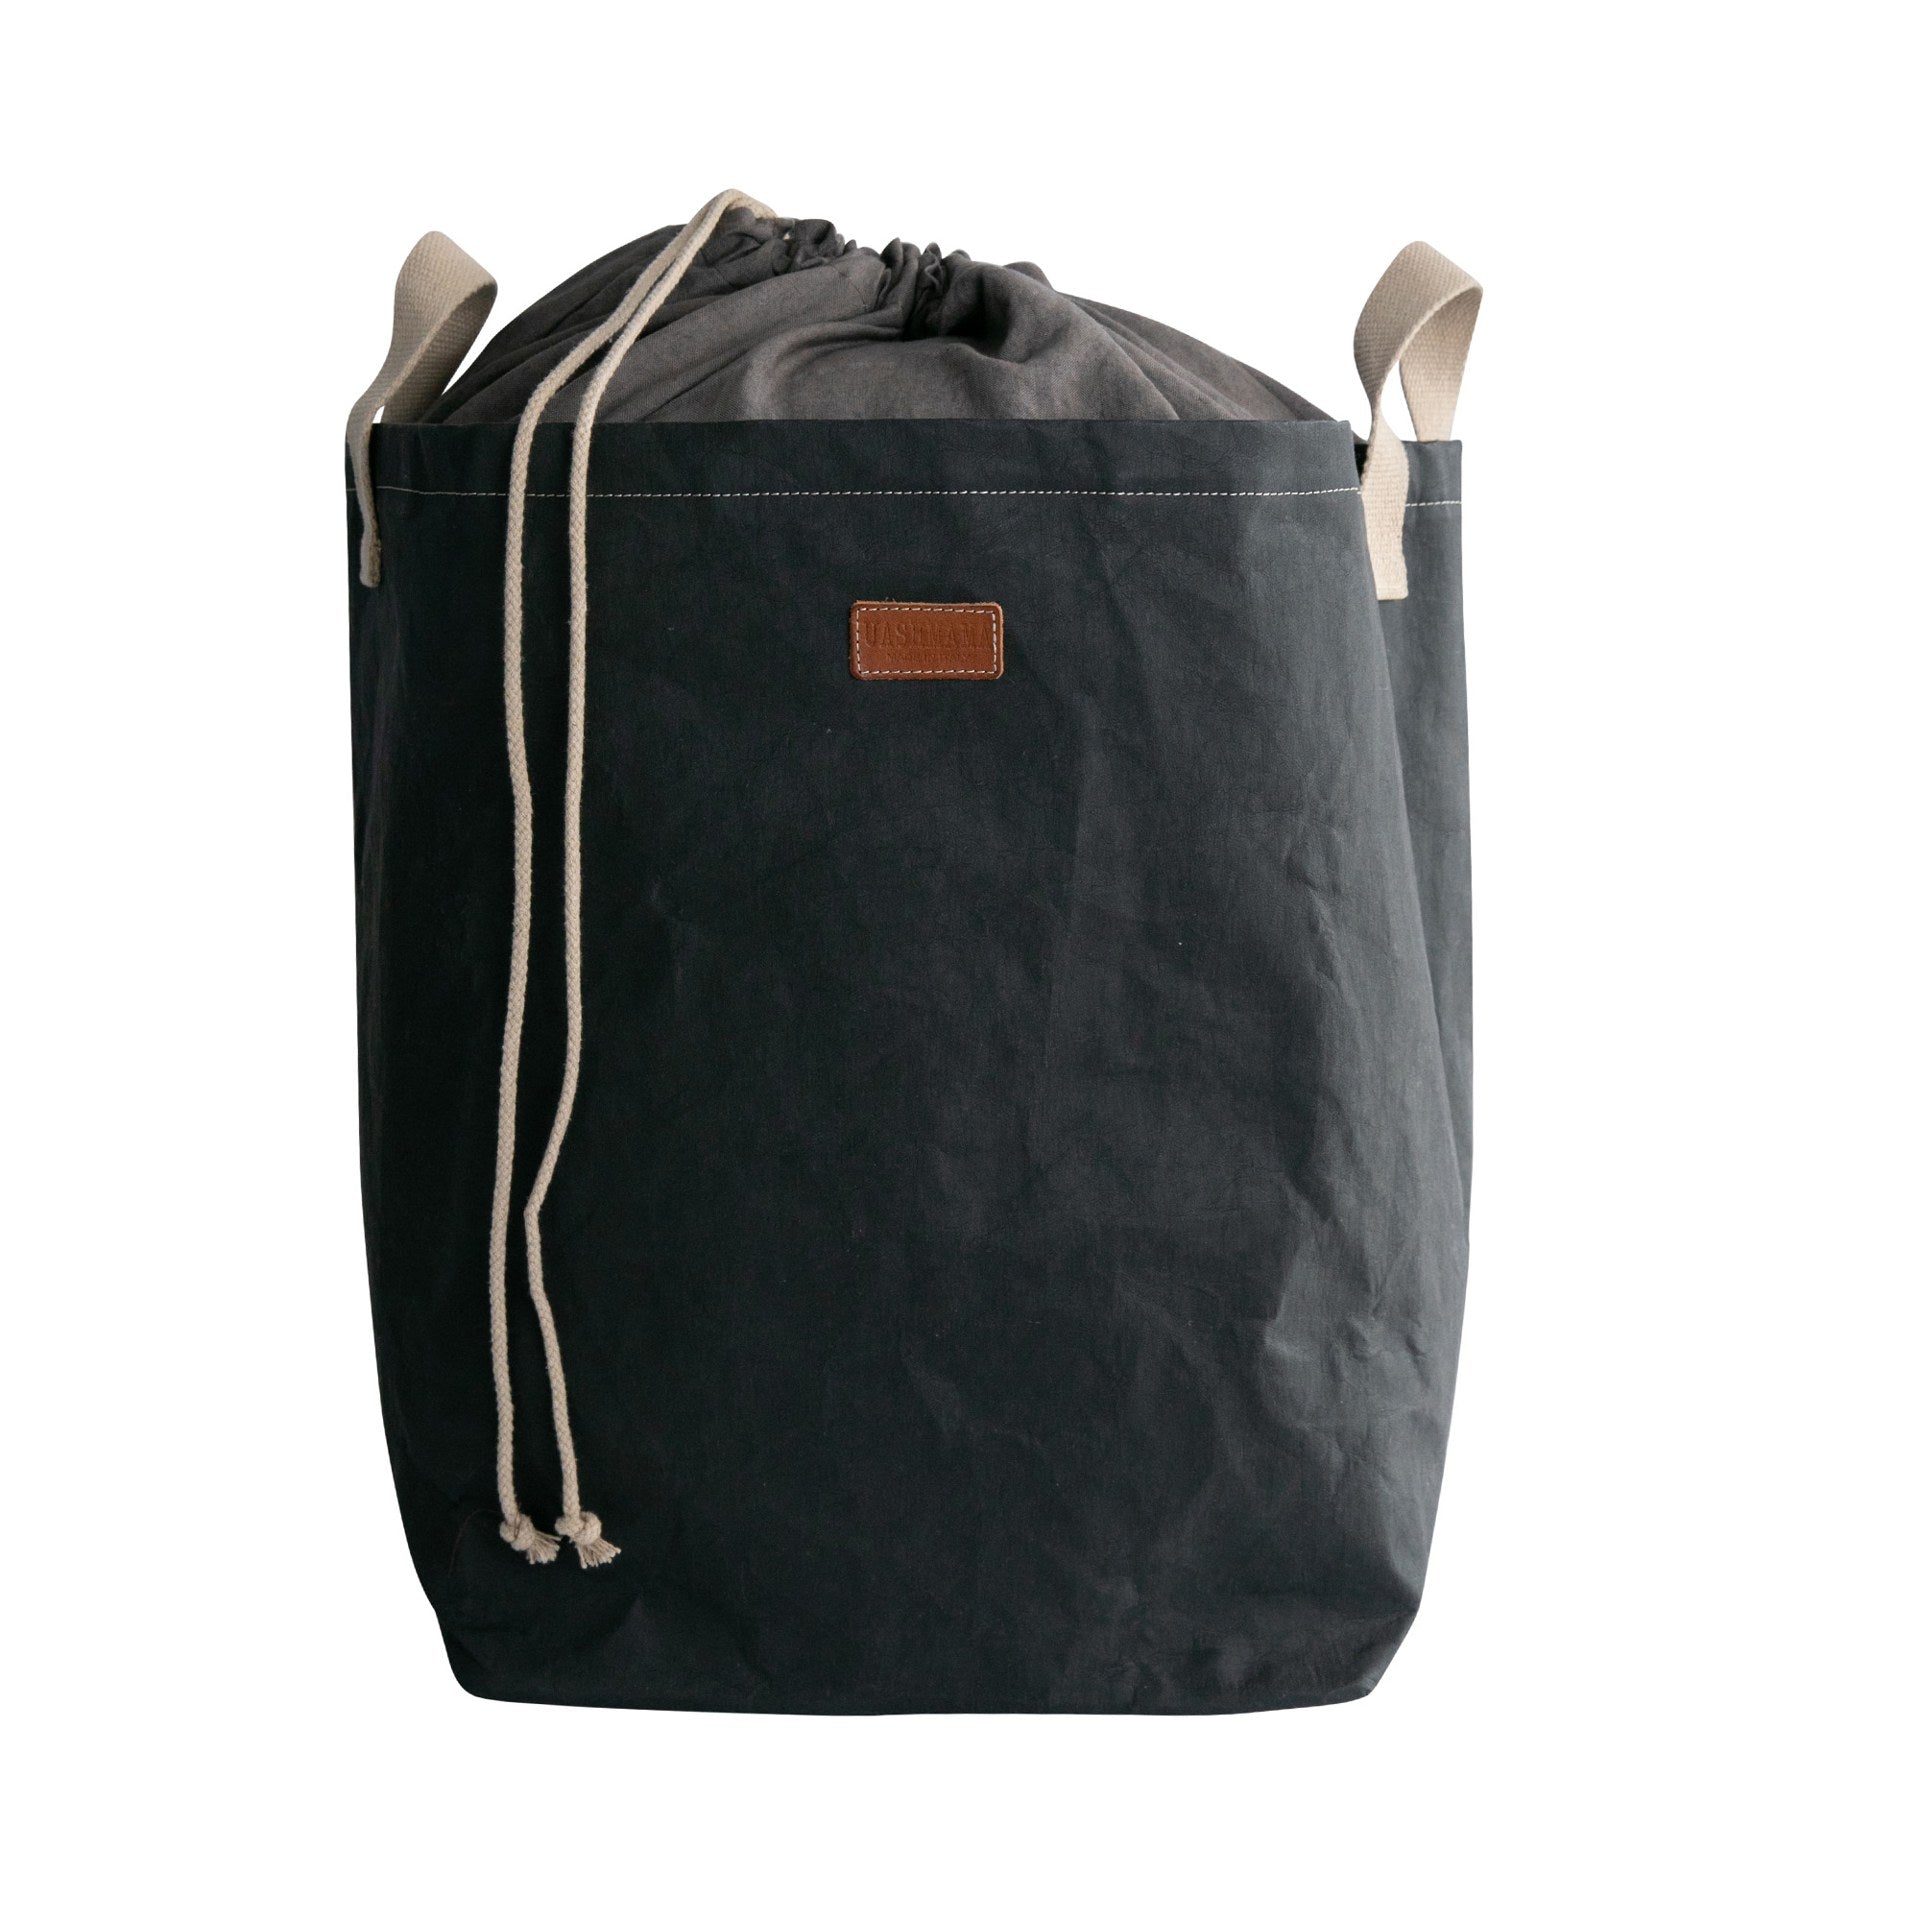 Drawstring Laundry or Storage Bag in Black Color. Linen and Washable Paper Material